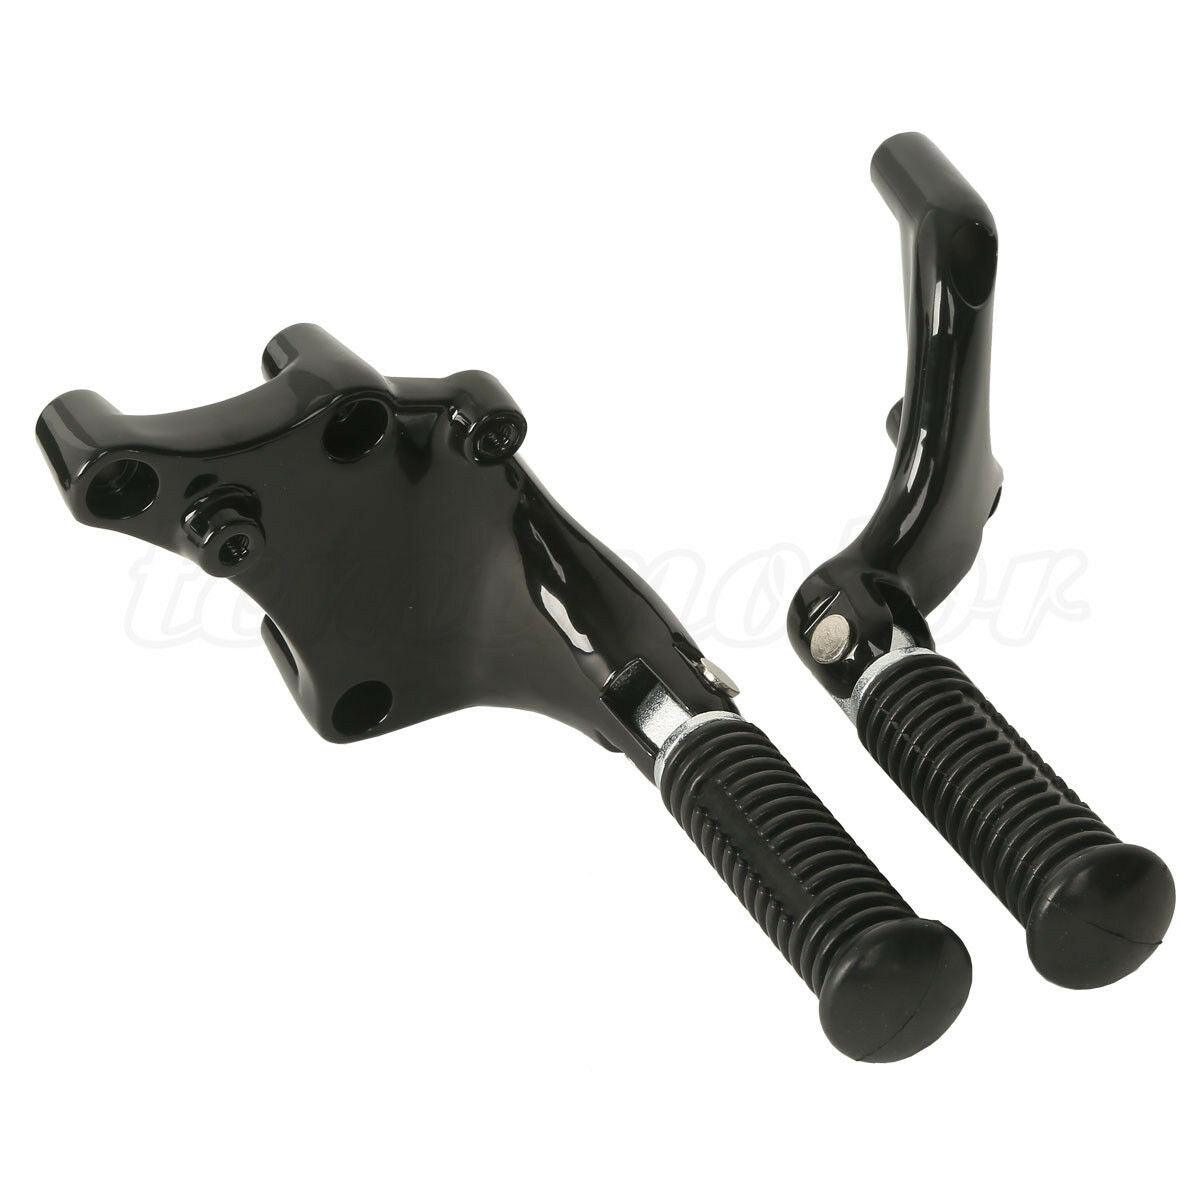 New Passenger Foot Pegs Pedal Mount For Harley Sportster XL 883 XL1200 2014-2022 - Moto Life Products